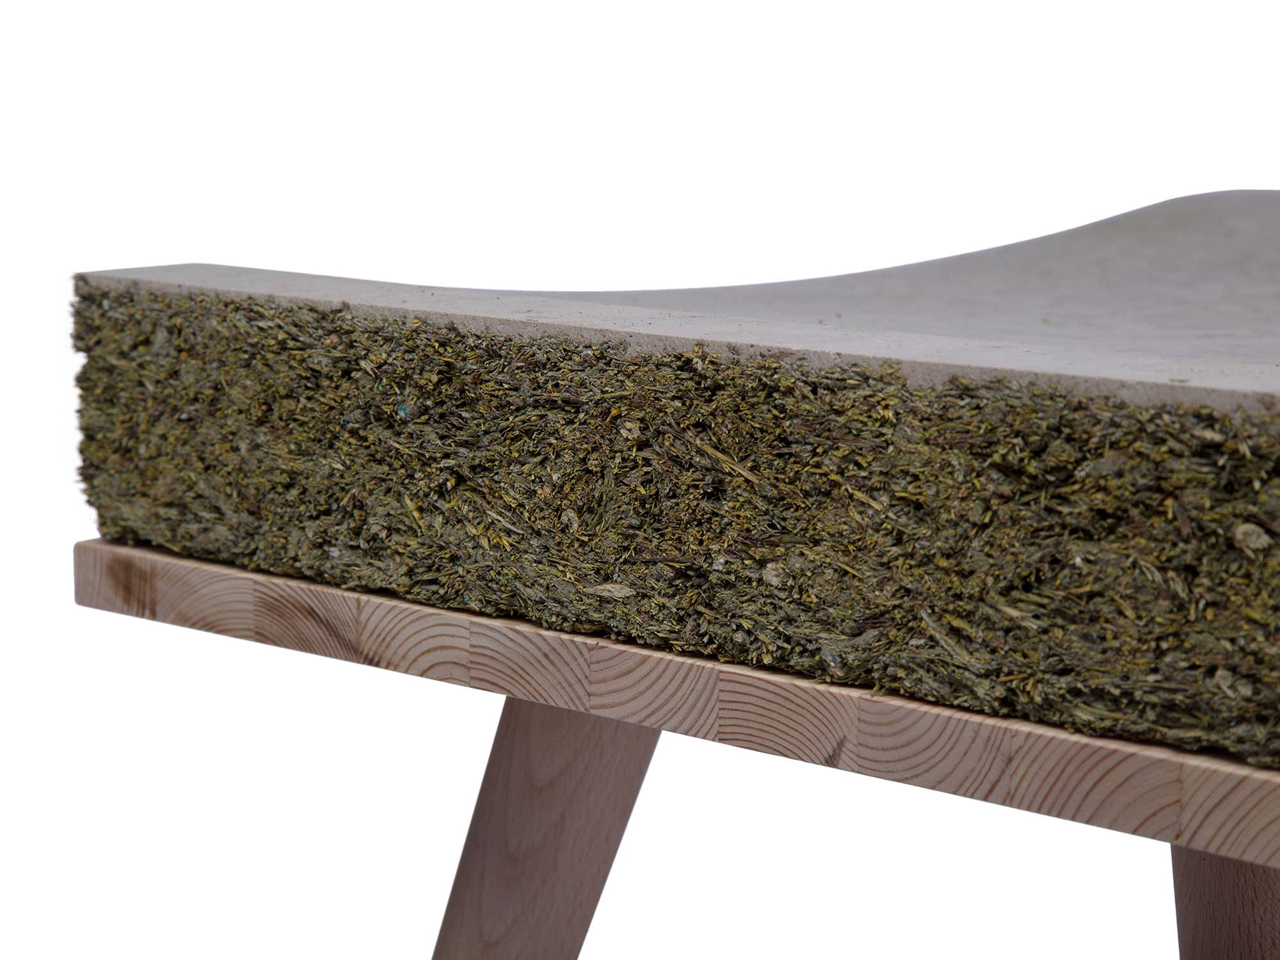 CHAYR: A Cozy Seat Made From Hay and Grass